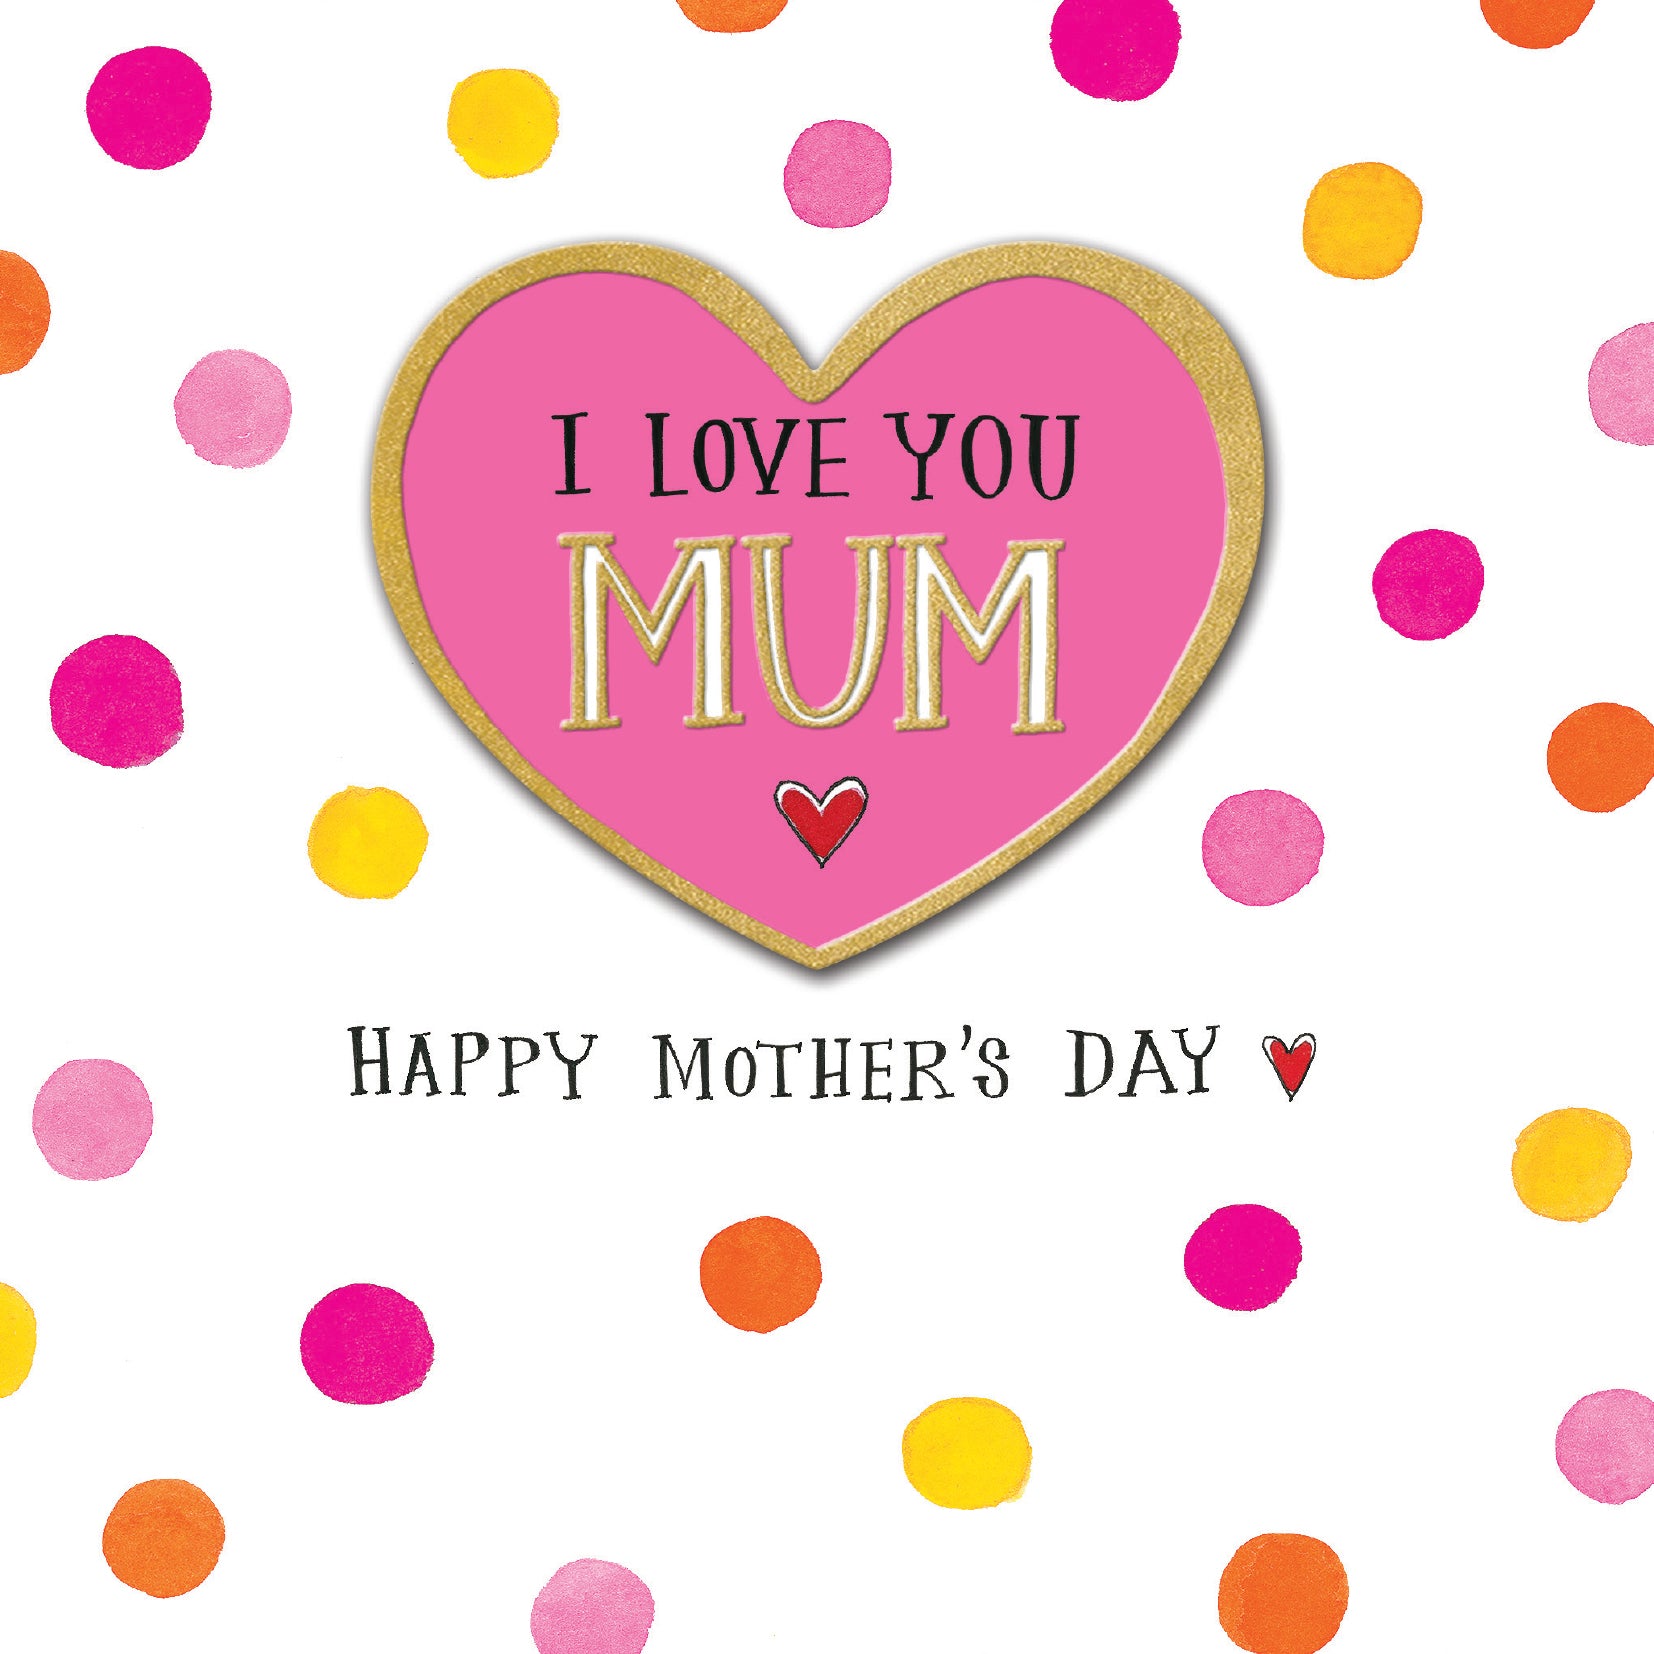 Love You Mum Spotty Heart Mother's Day Card by penny black